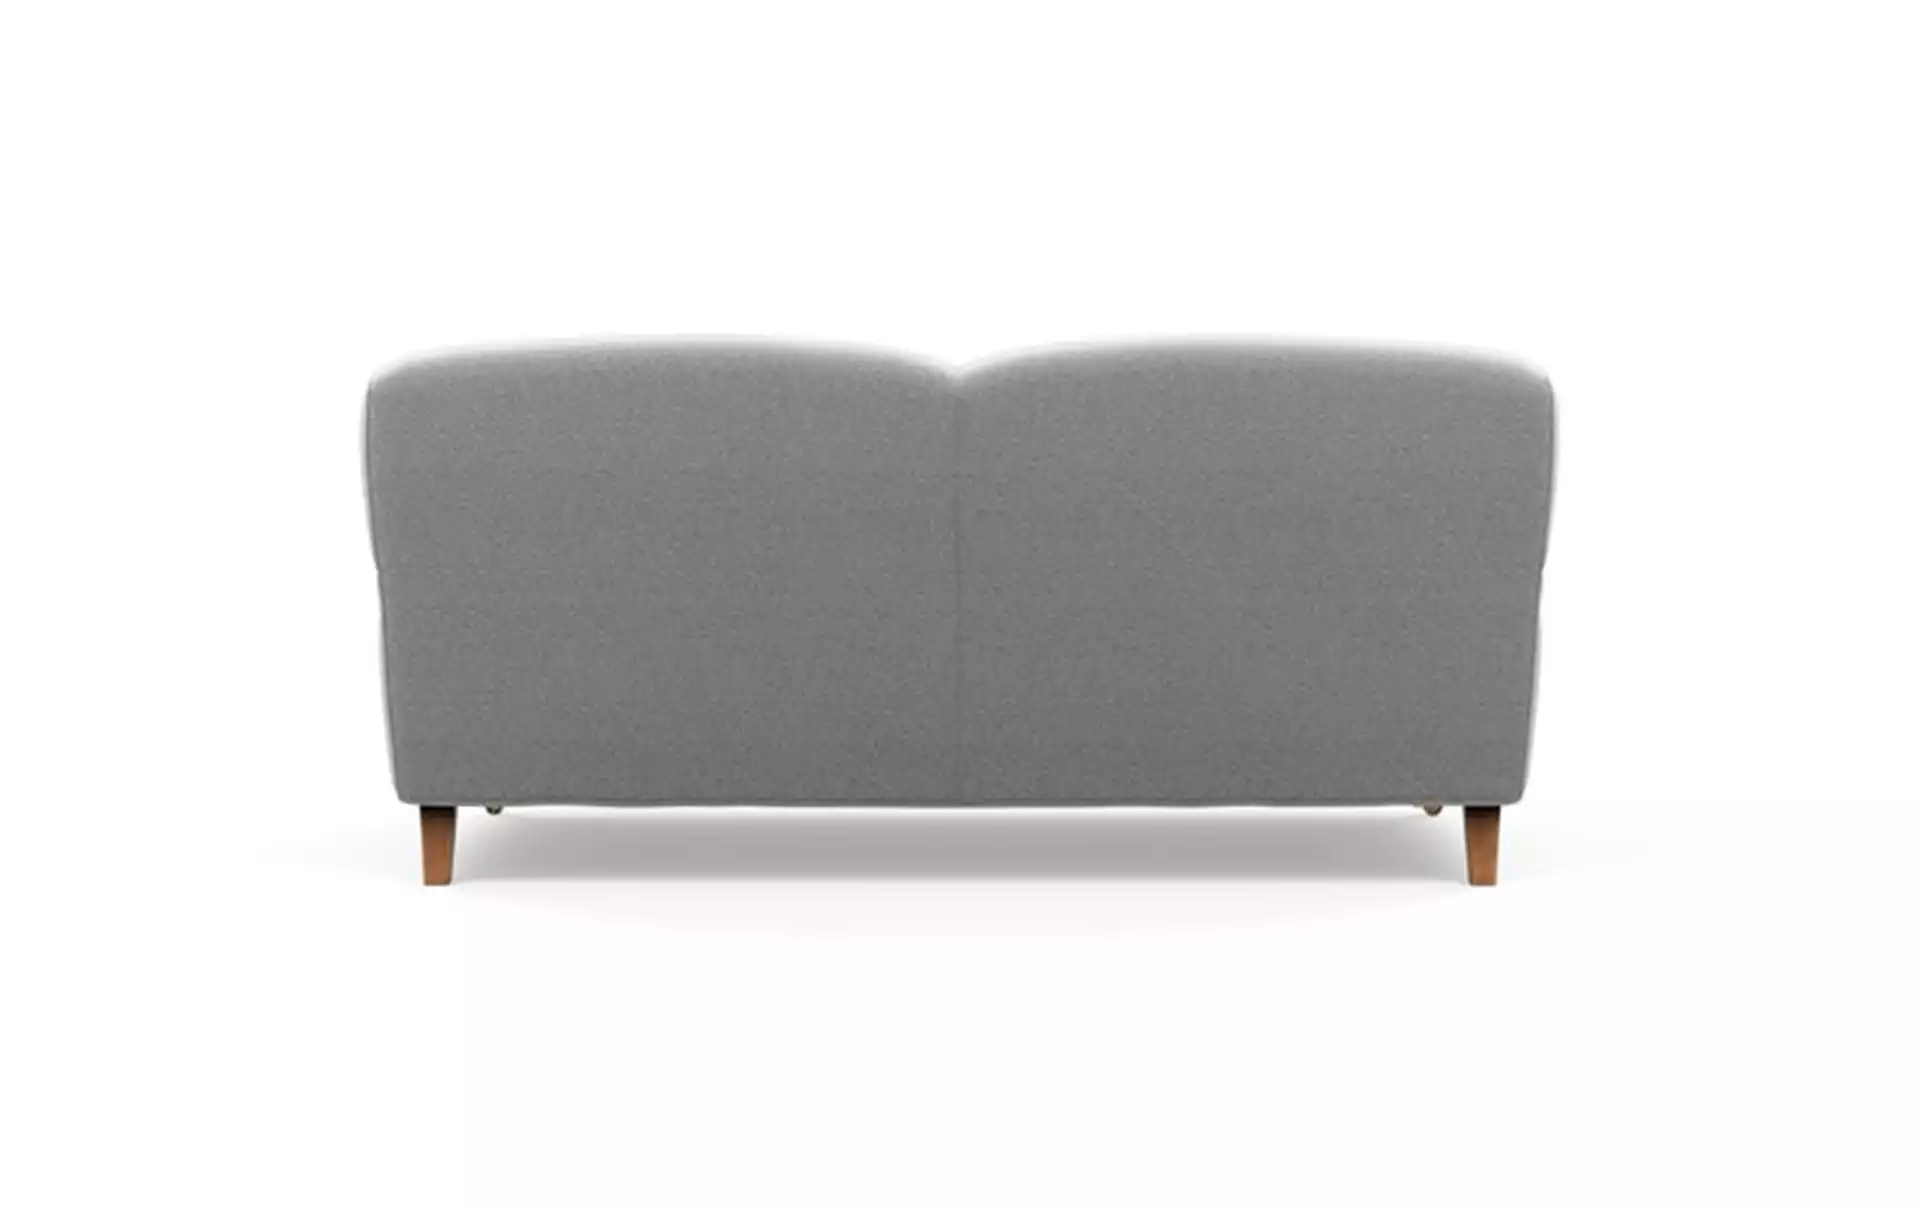 Rose by The Everygirl Sofa with Grey Ash Fabric and Oiled Walnut with Brass Caster legs